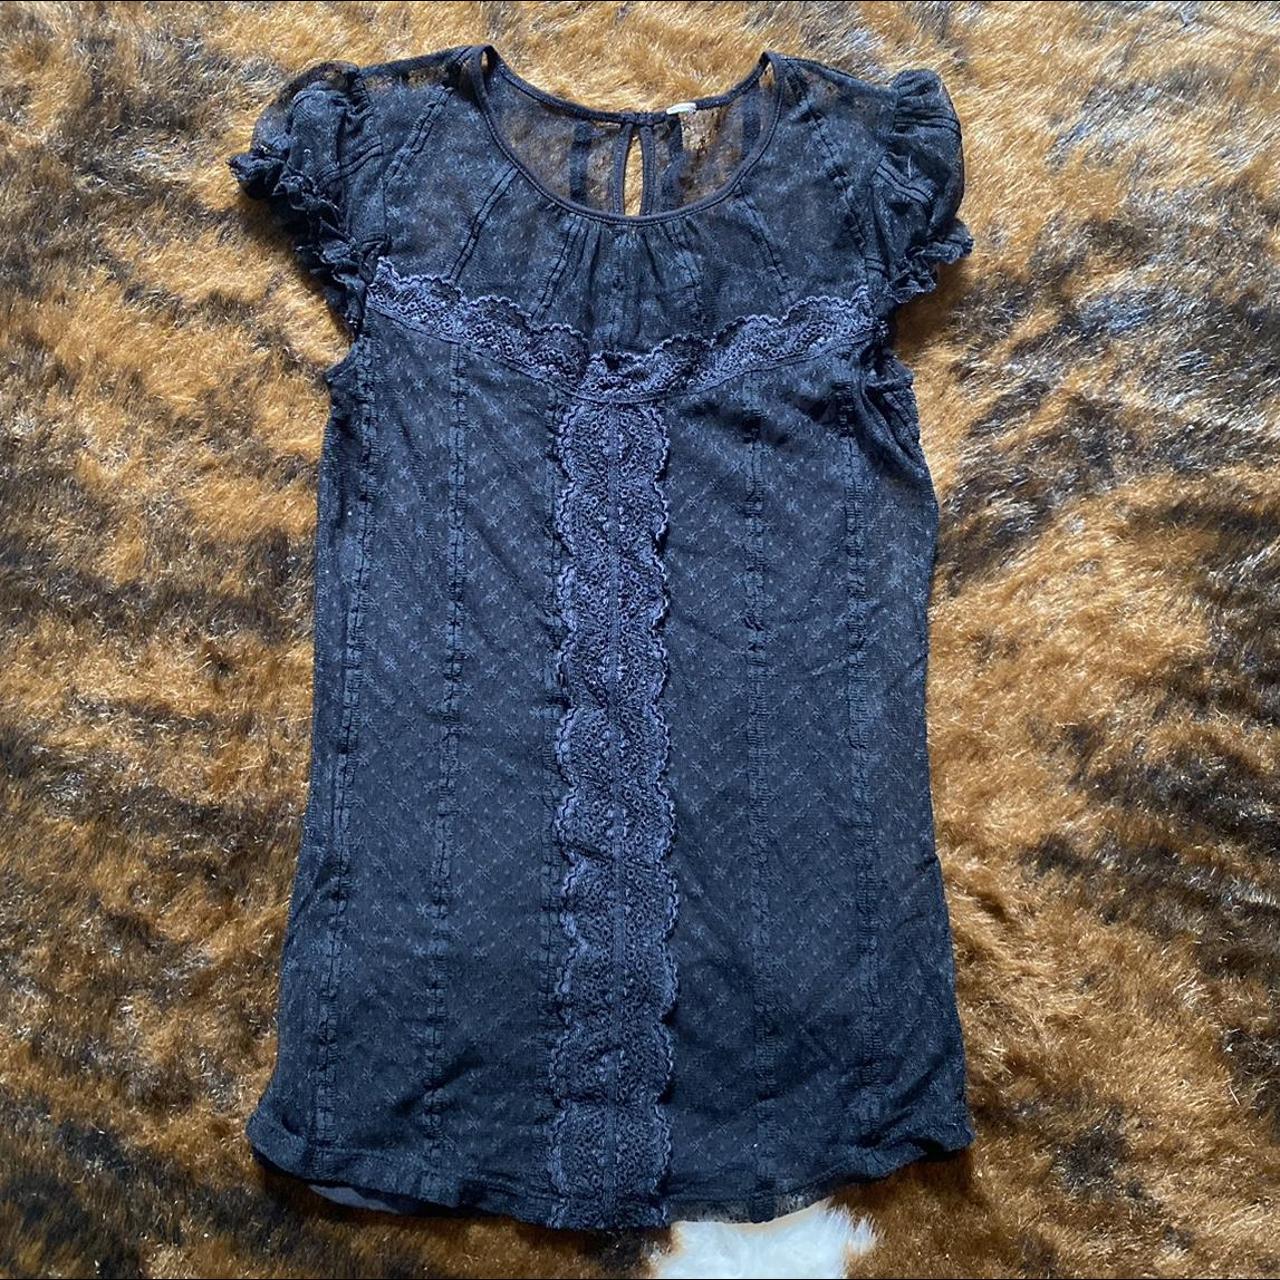 Black lace top - size small Unfortunately the tag... - Depop